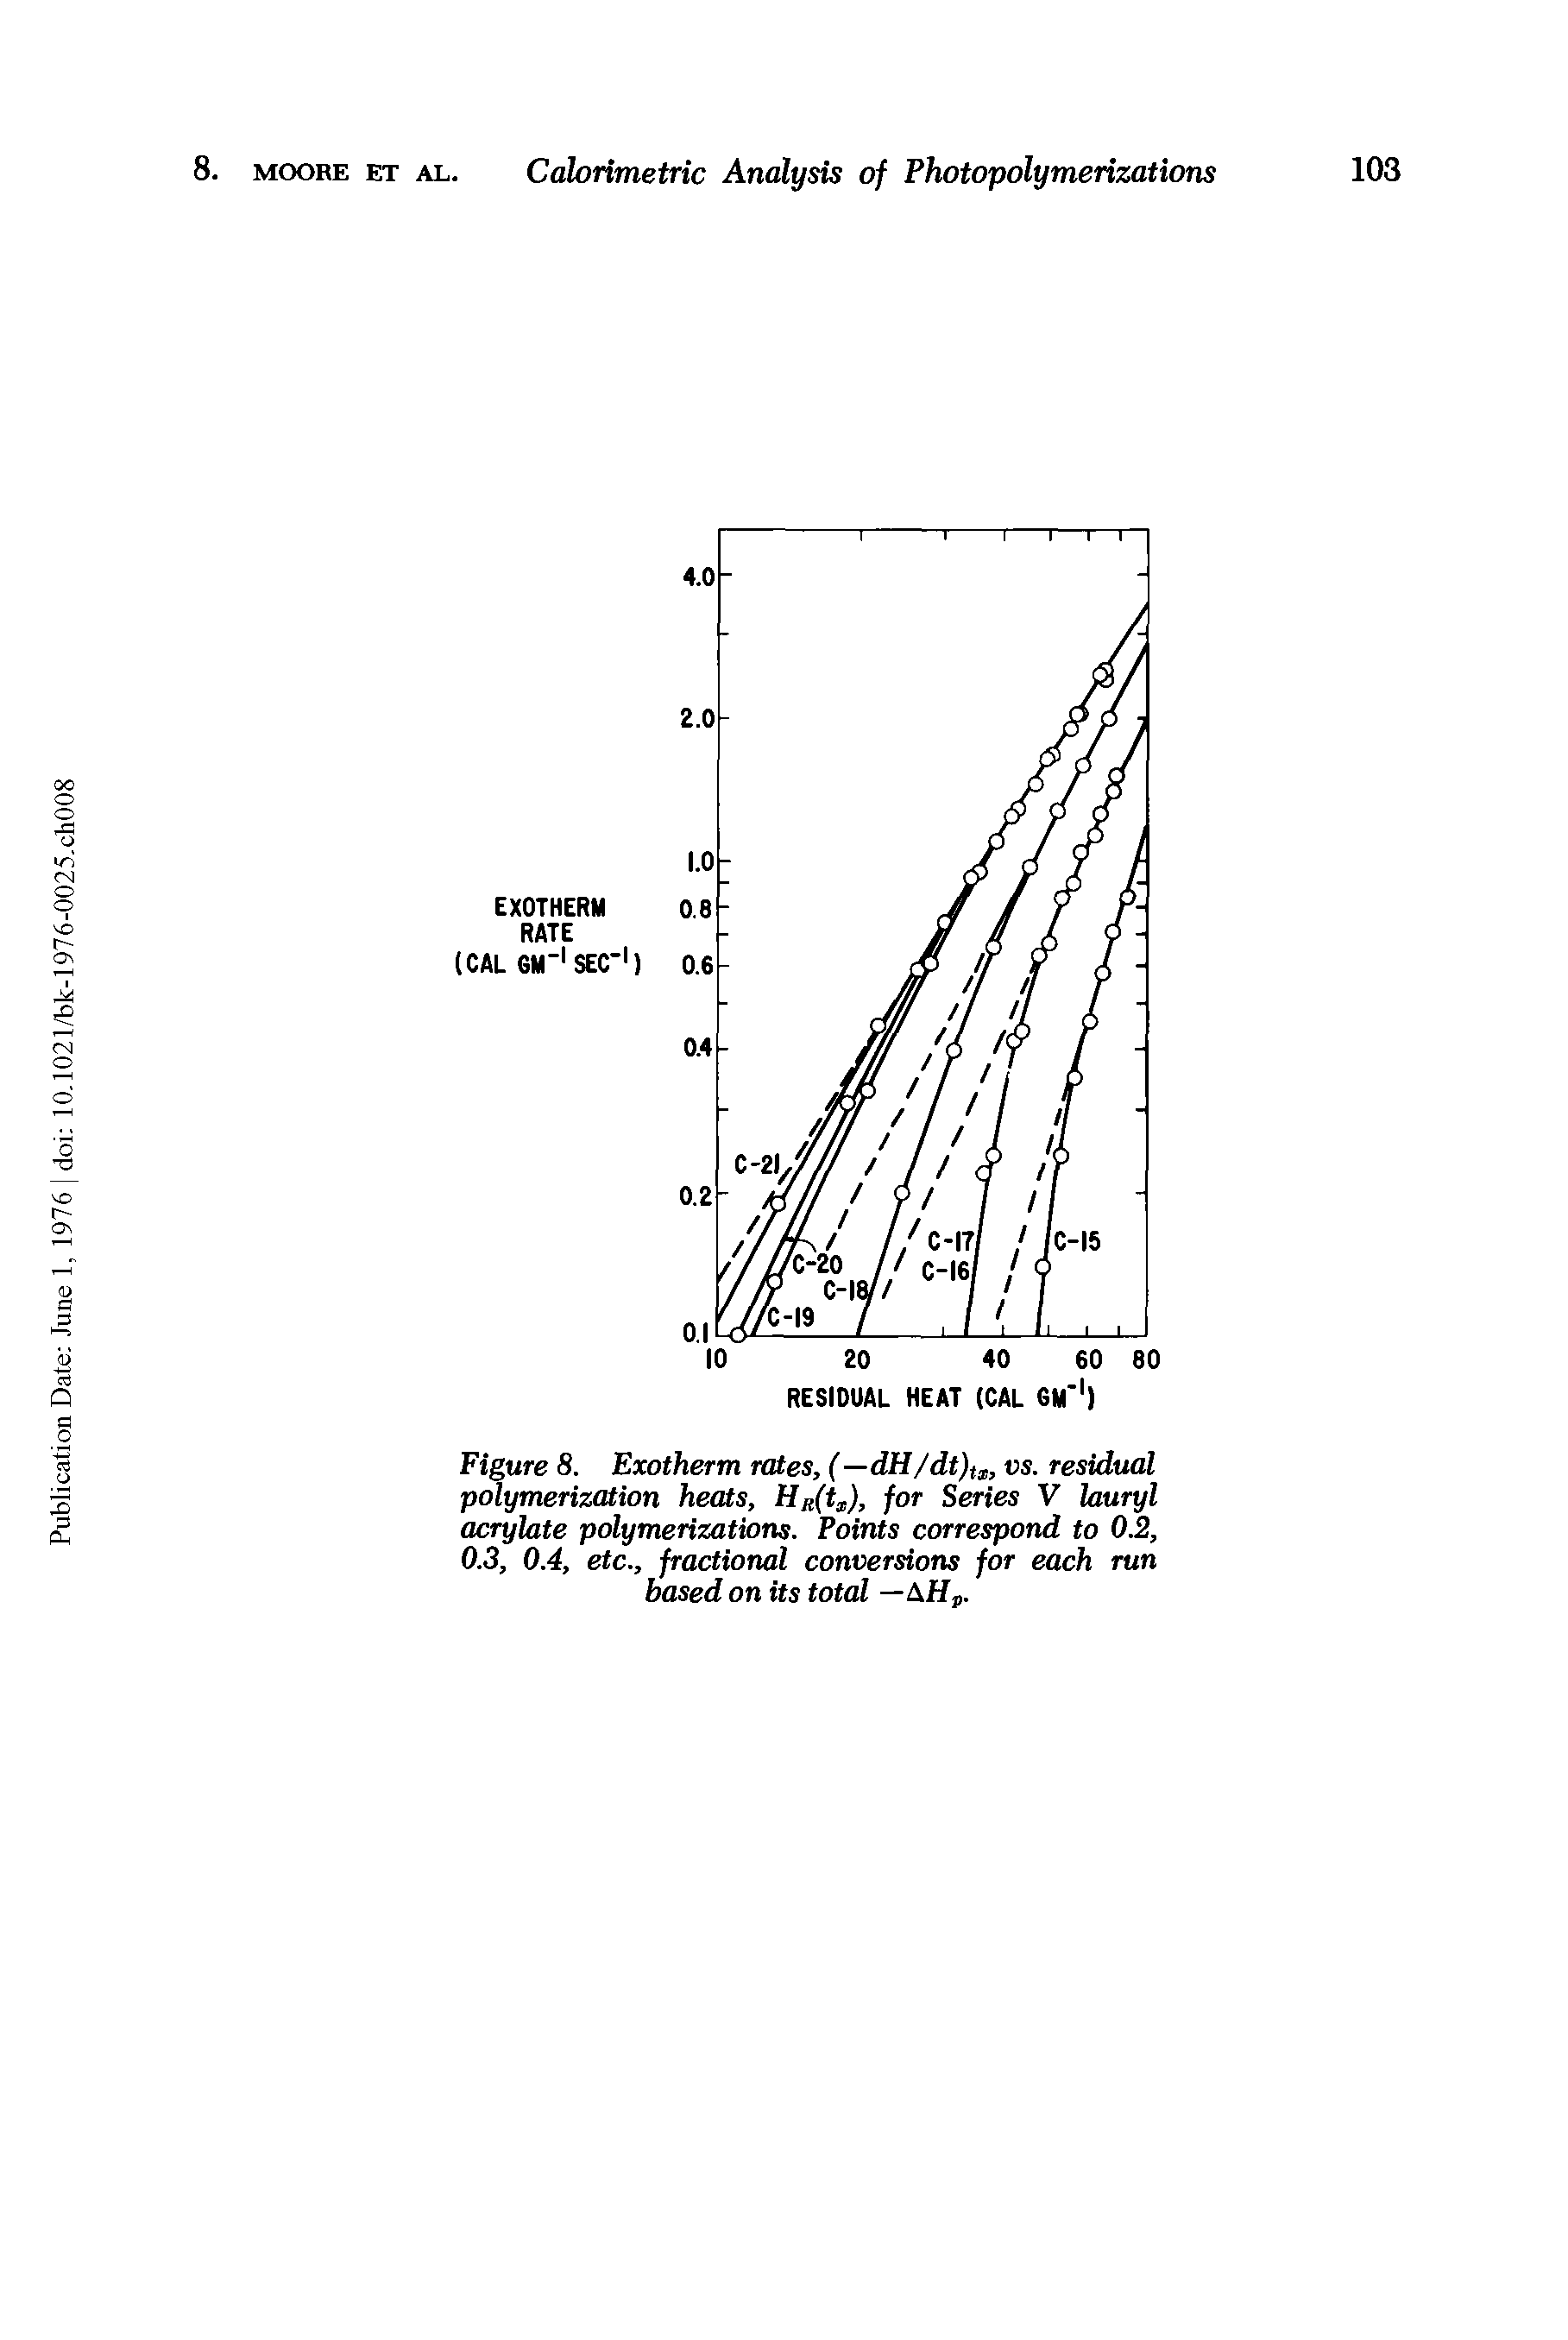 Figure 8. Exotherm rates, (—dH/dt)tx, vs. residual polymerization heats, Hg(tj.), for Series V lauryl acrylate polymerizations. Points correspond to 0.2, 0.3, 0.4, etc., fractional conversions for each run based on its total —AH,.